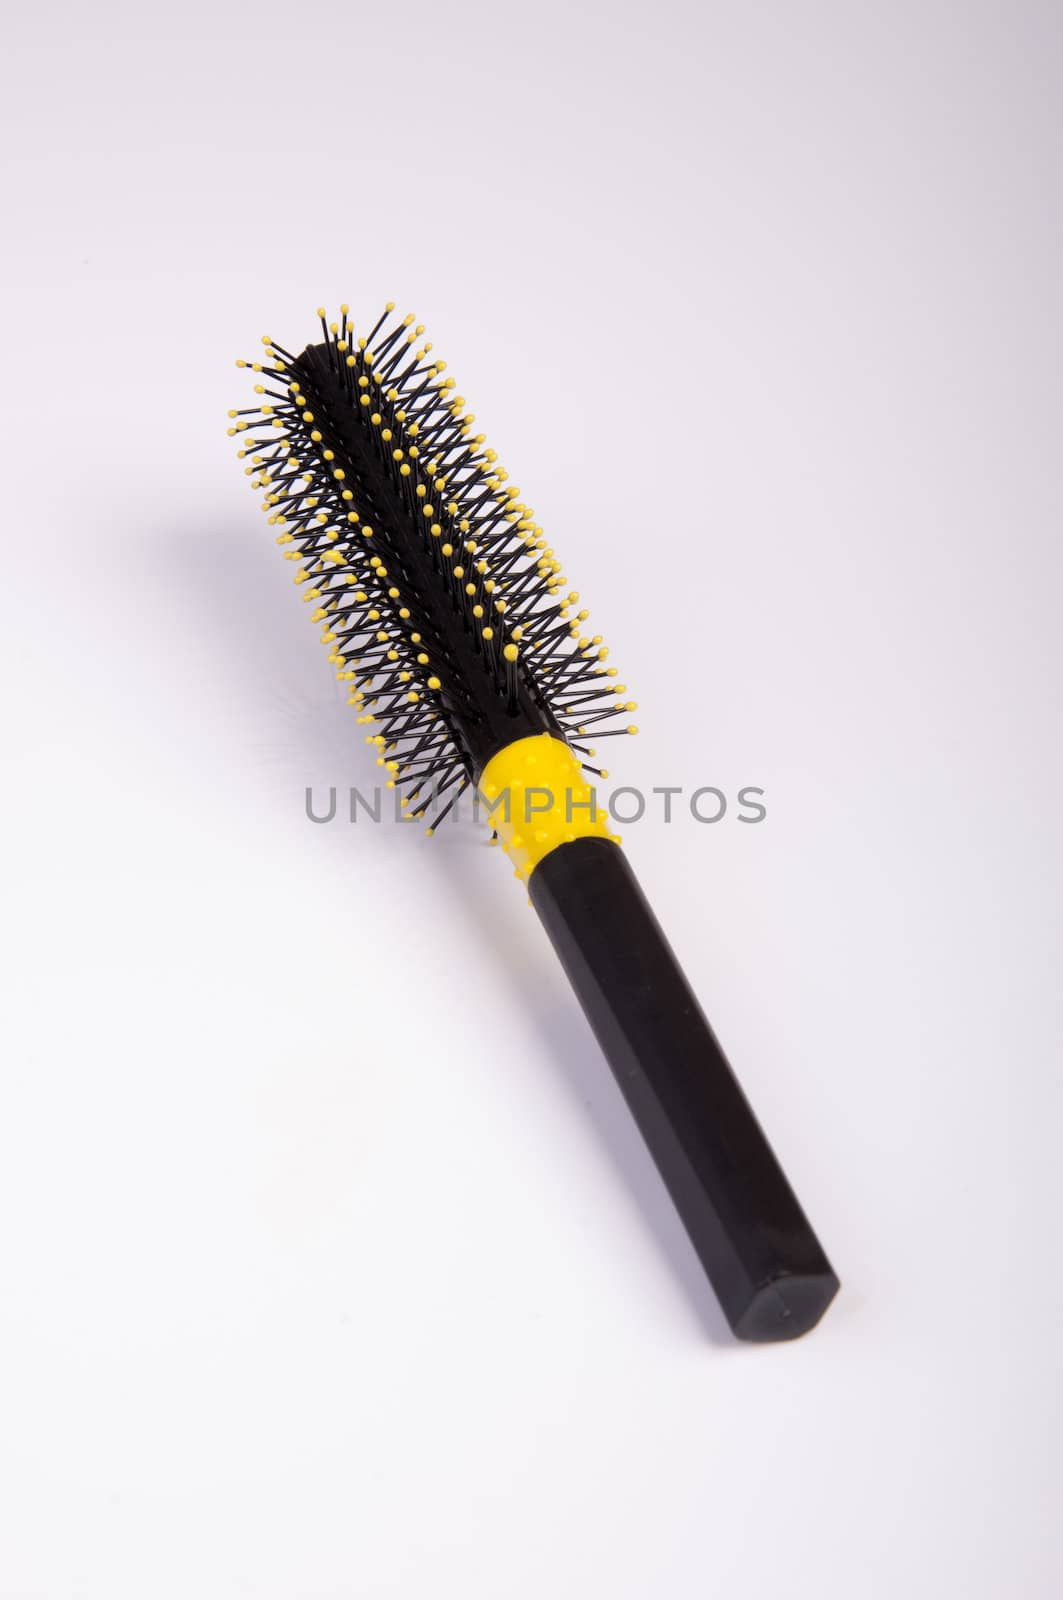 An image of comb on white background